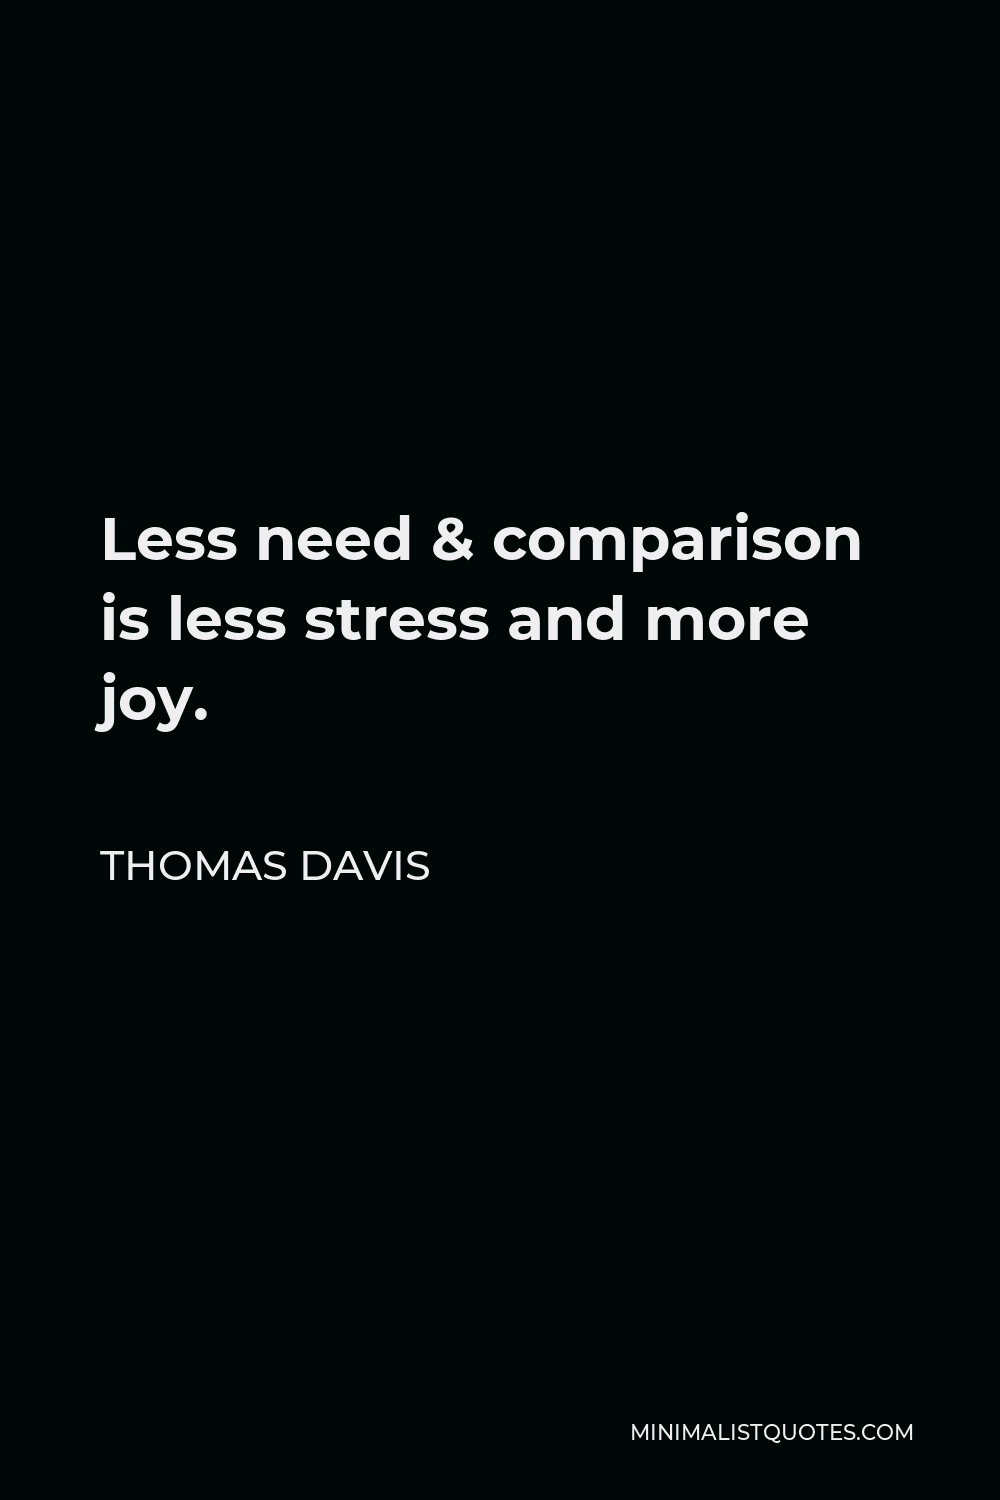 Thomas Davis Quote - Less need & comparison is less stress and more joy.